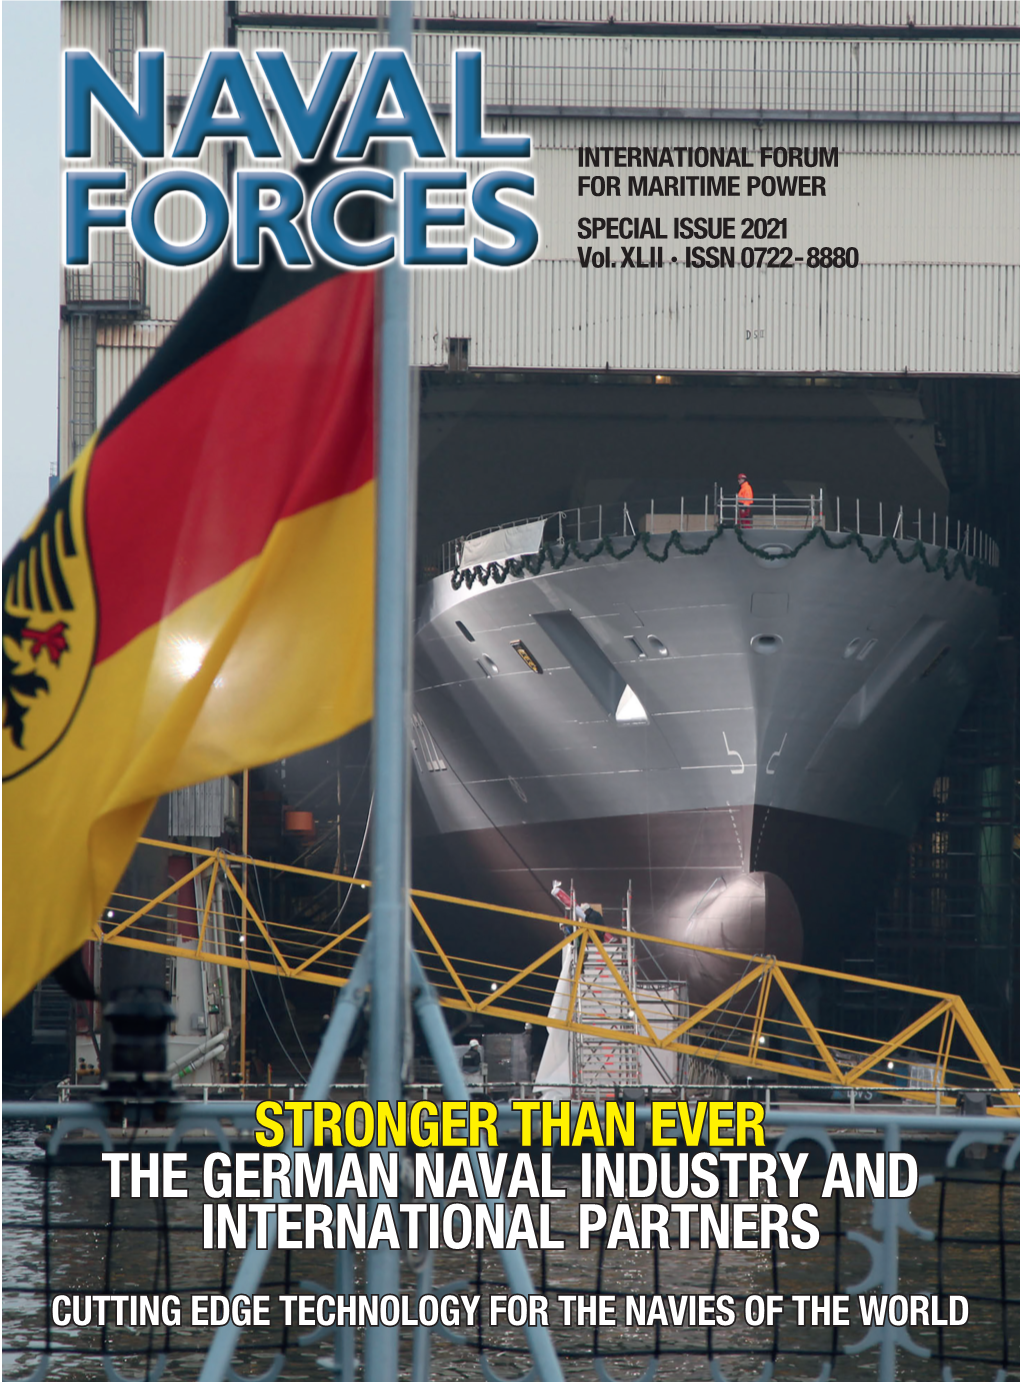 STRONGER THAN EVER the GERMAN NAVAL INDUSTRY and INTERNATIONAL PARTNERS CUTTING EDGE TECHNOLOGY for the NAVIES of the WORLD German Naval Industry Contents Editorial